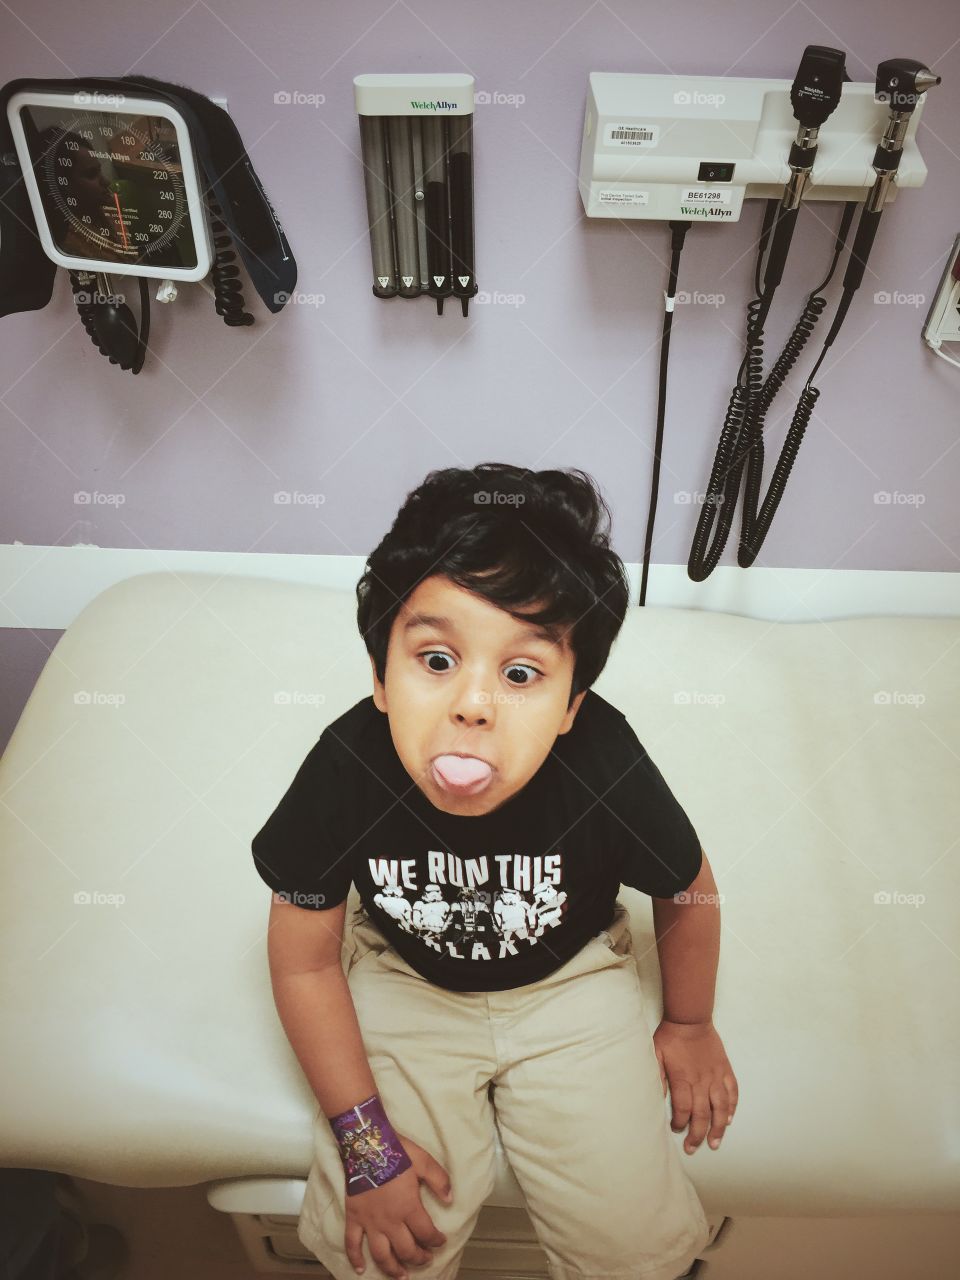 Funny face making kid at doctor appointment 